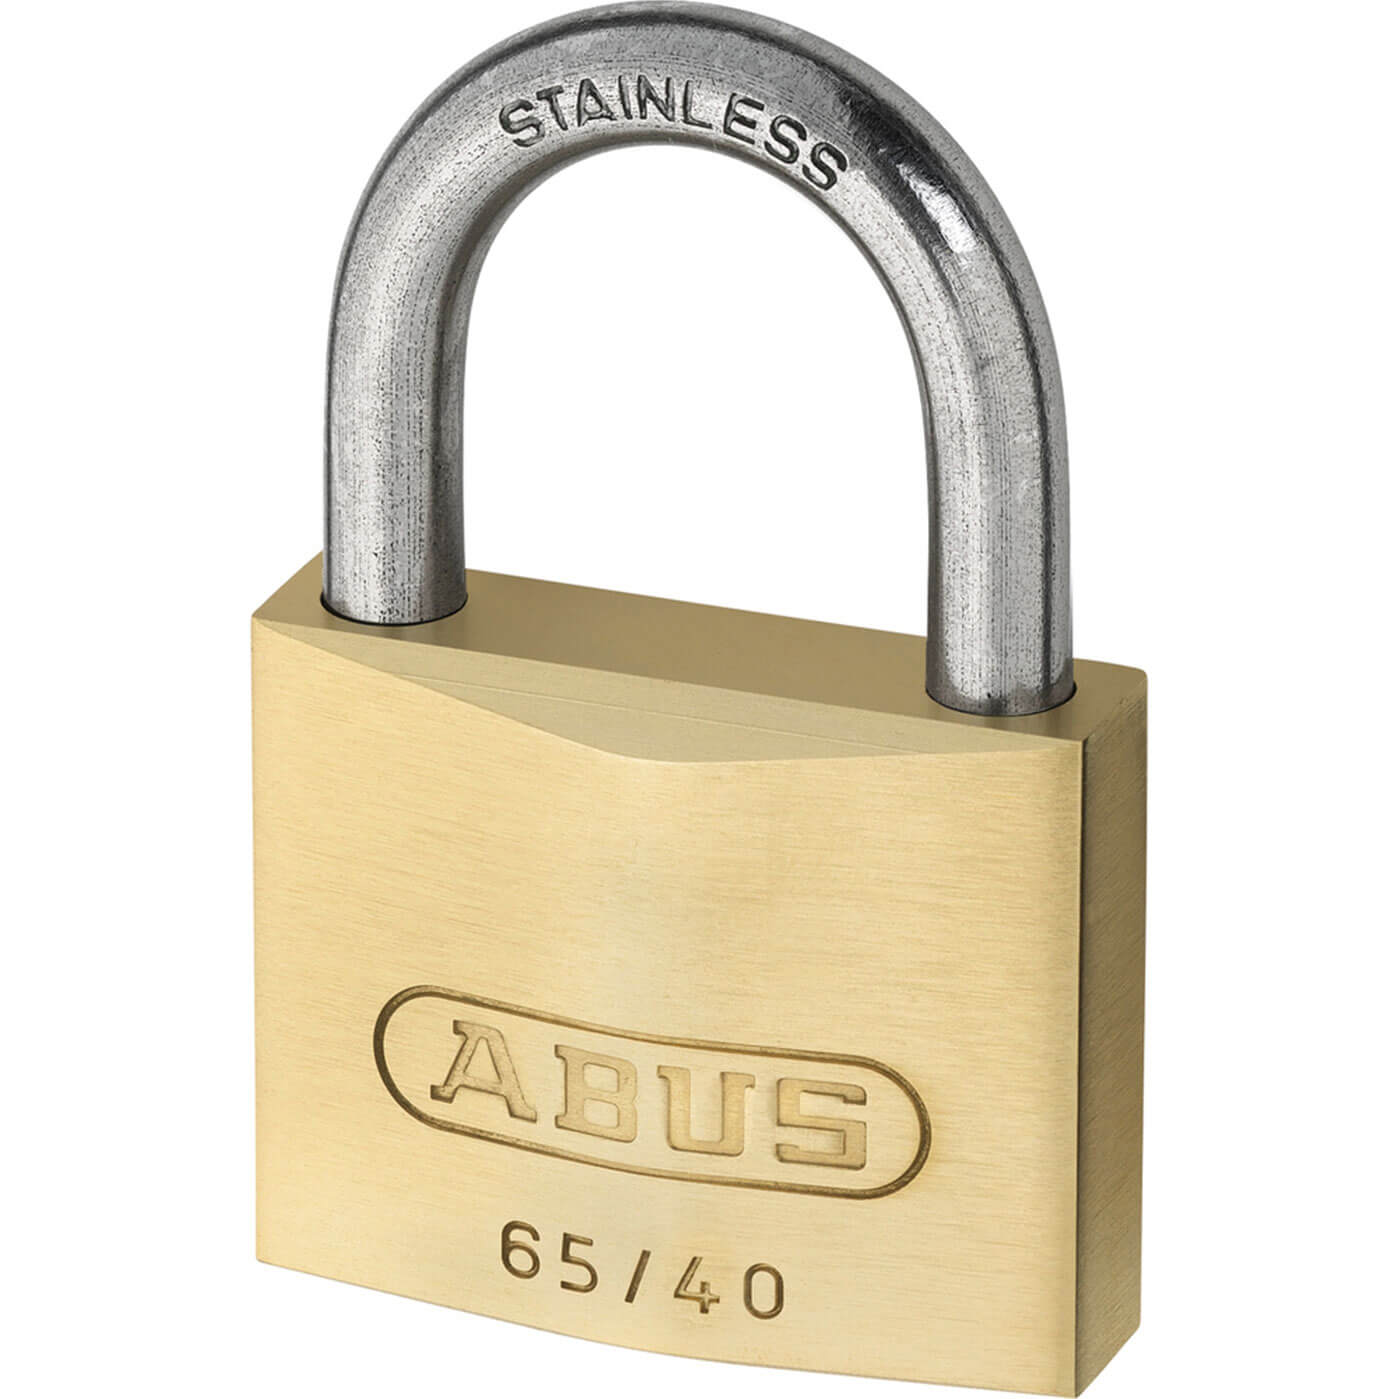 Image of Abus 30mm 65 Series Compact Brass Padlock With Stainless Steel Shackle